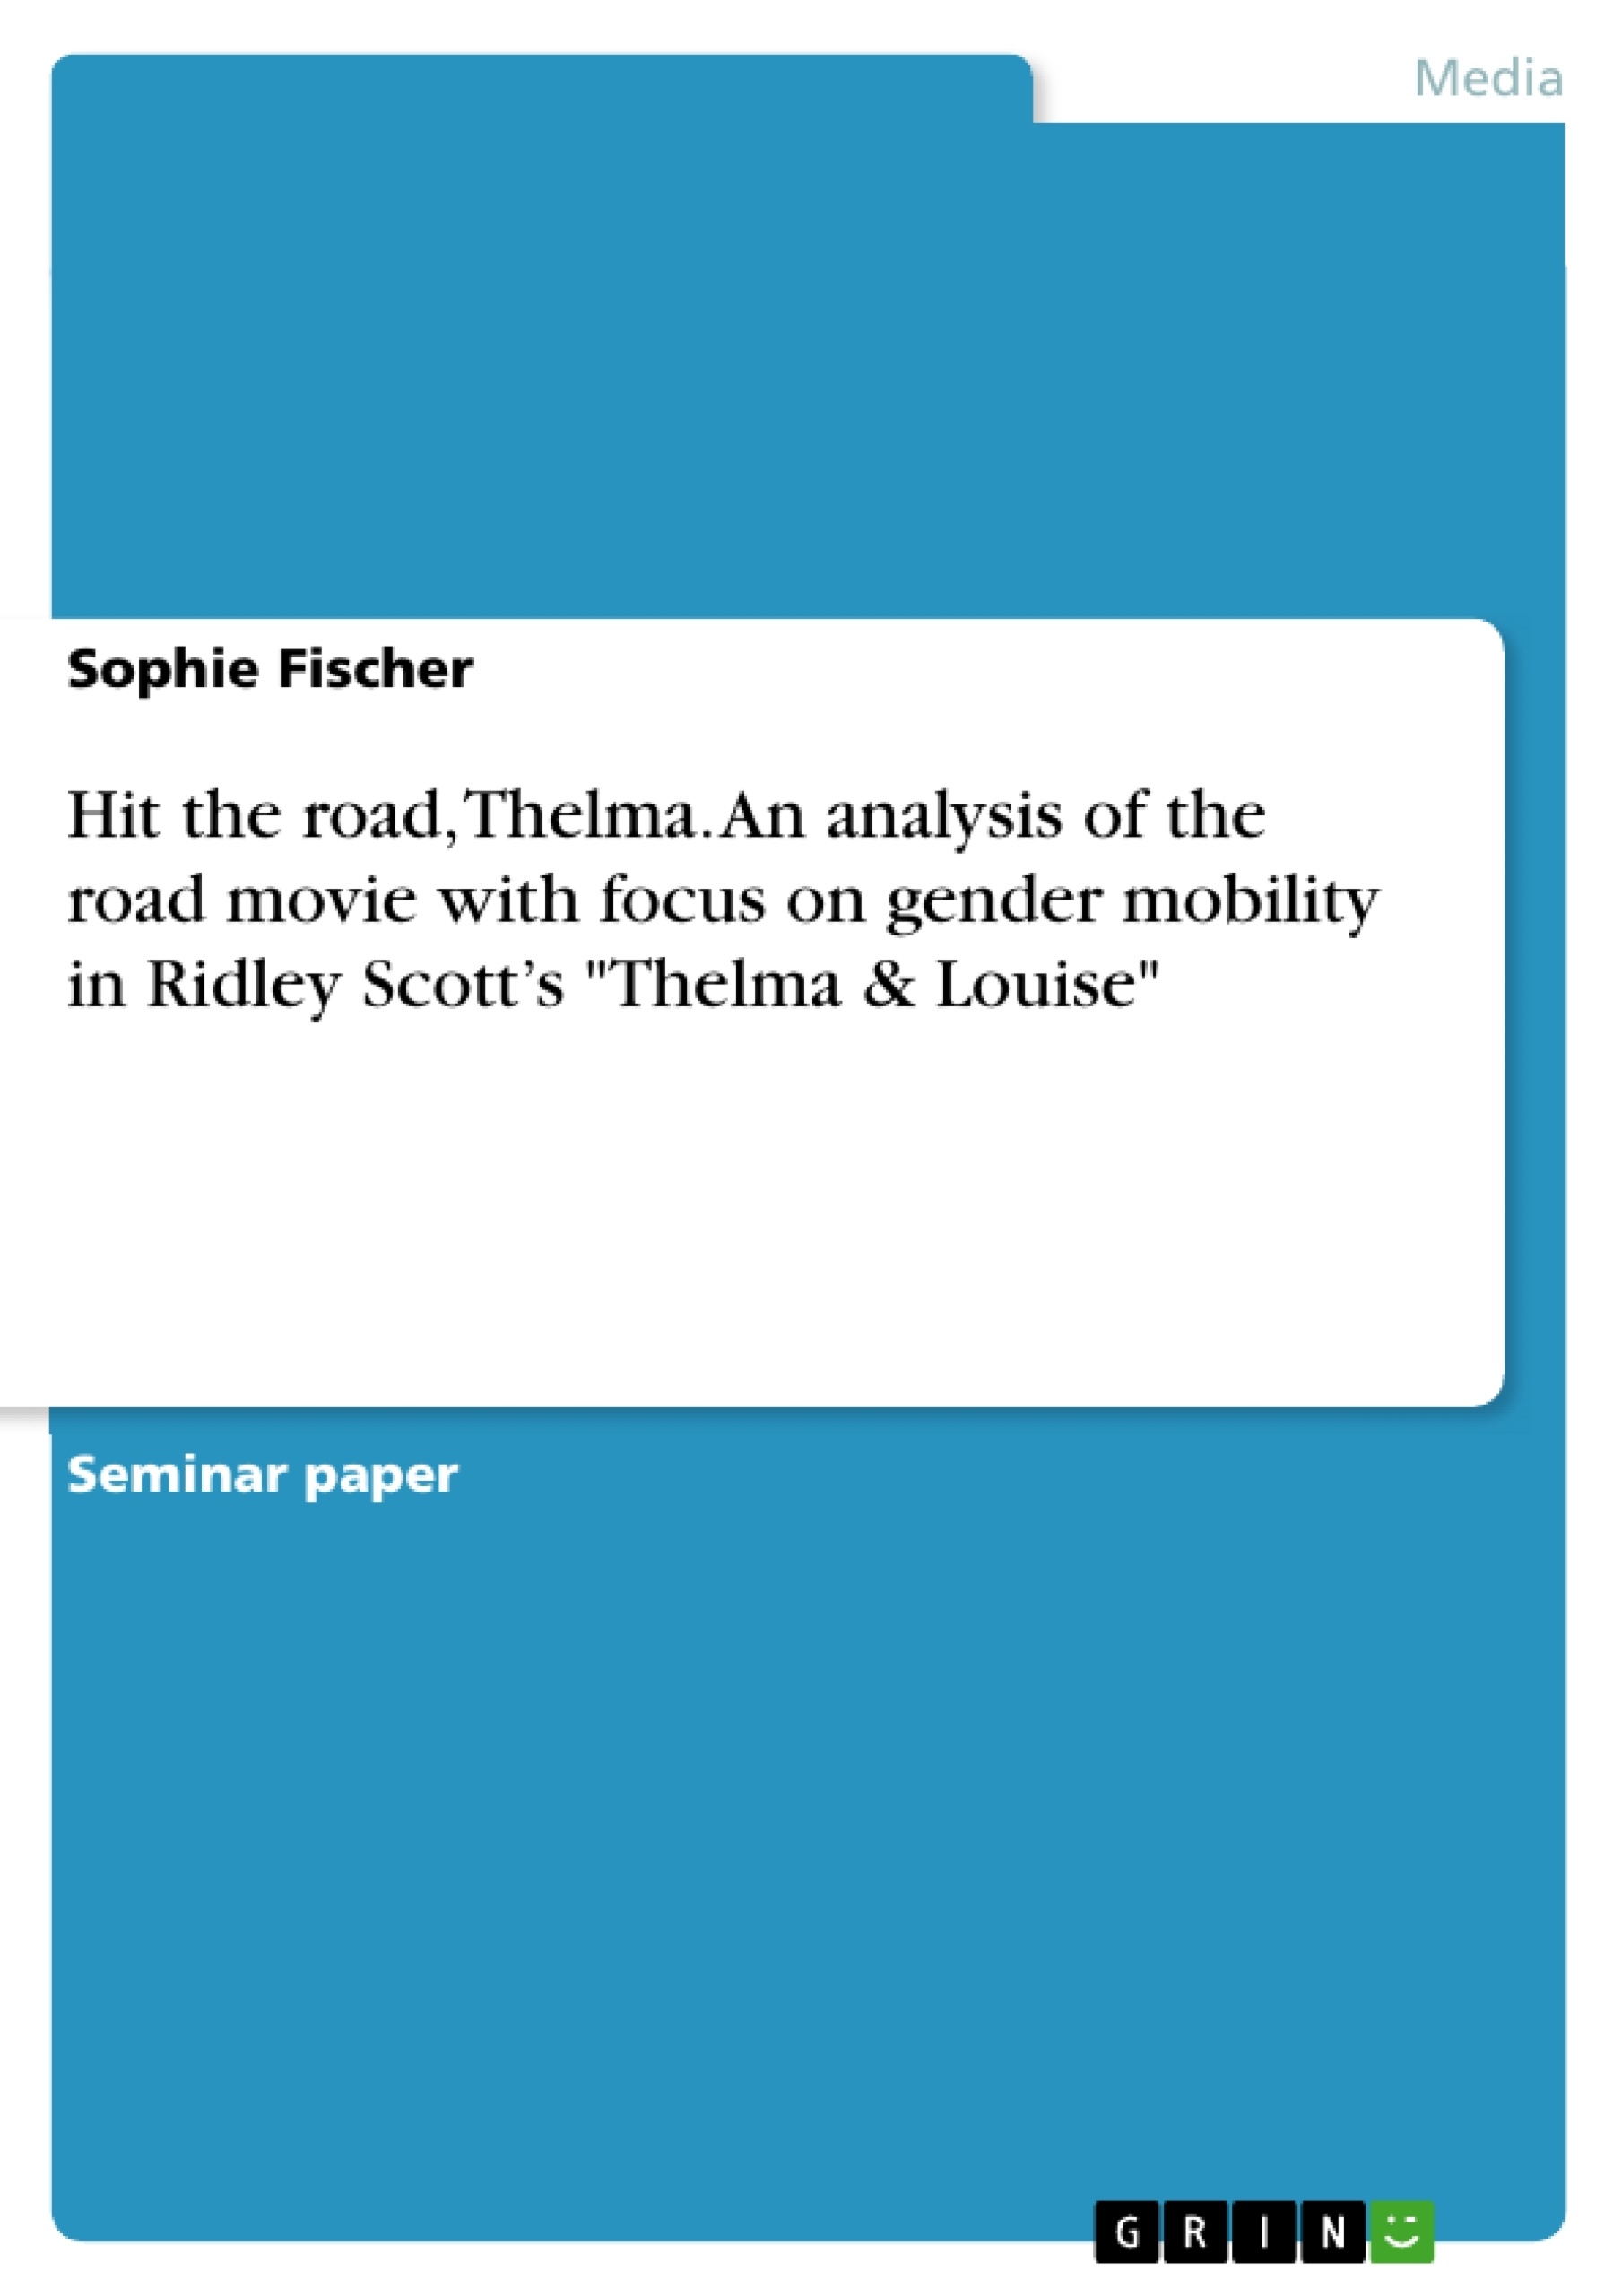 Title: Hit the road, Thelma. An analysis of the road movie with focus on gender mobility in Ridley Scott’s "Thelma & Louise"